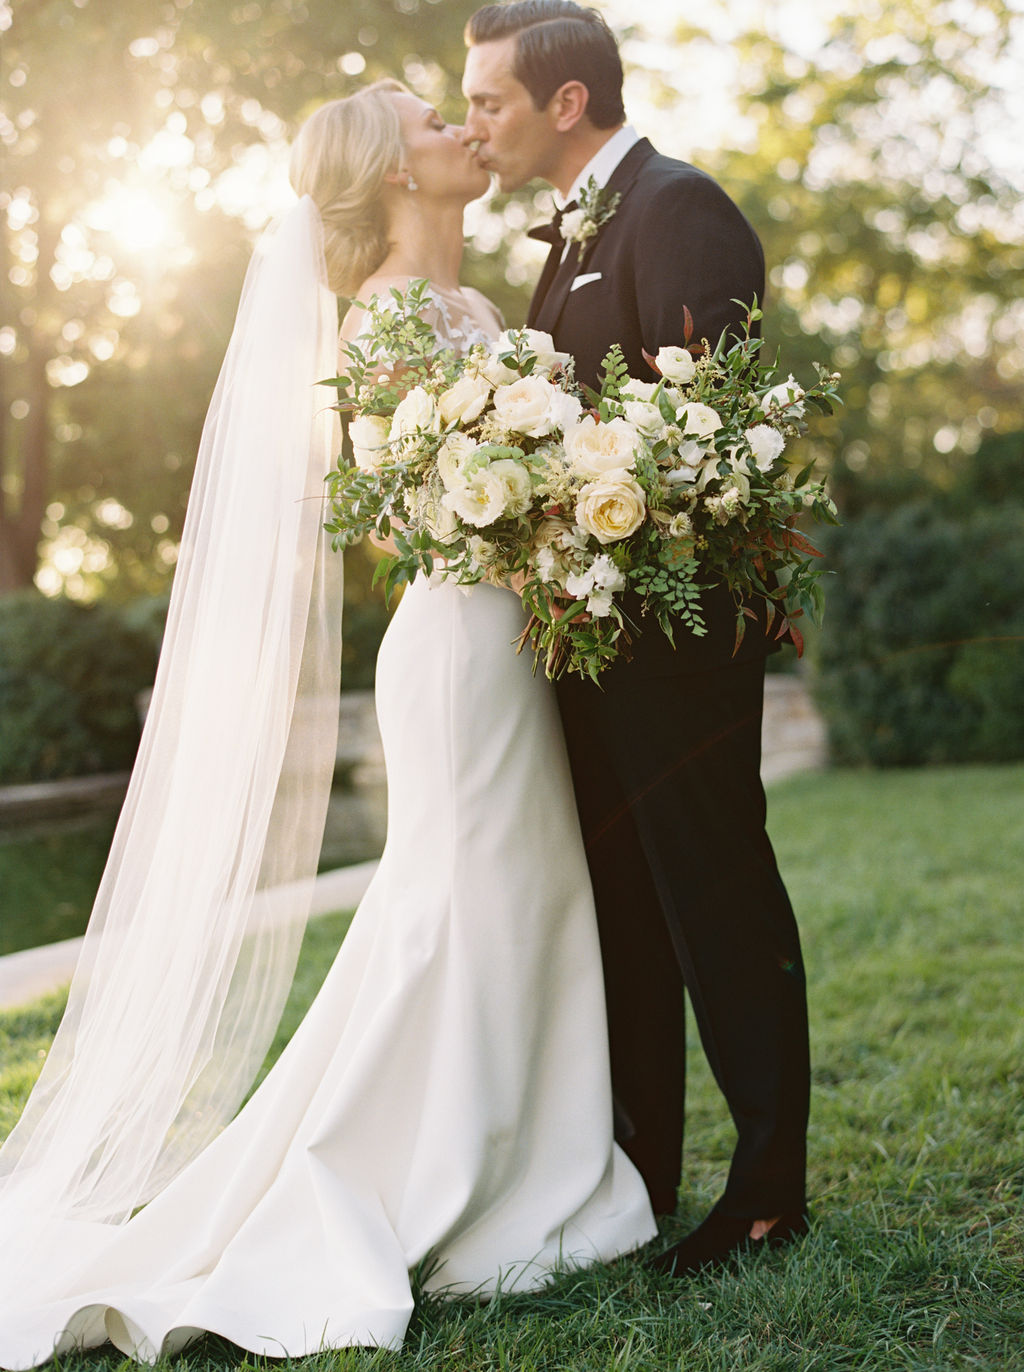 Untamed, asymmetrical bride’s bouquet with all white flowers and natural greenery. Southeast US Wedding Floral Design.